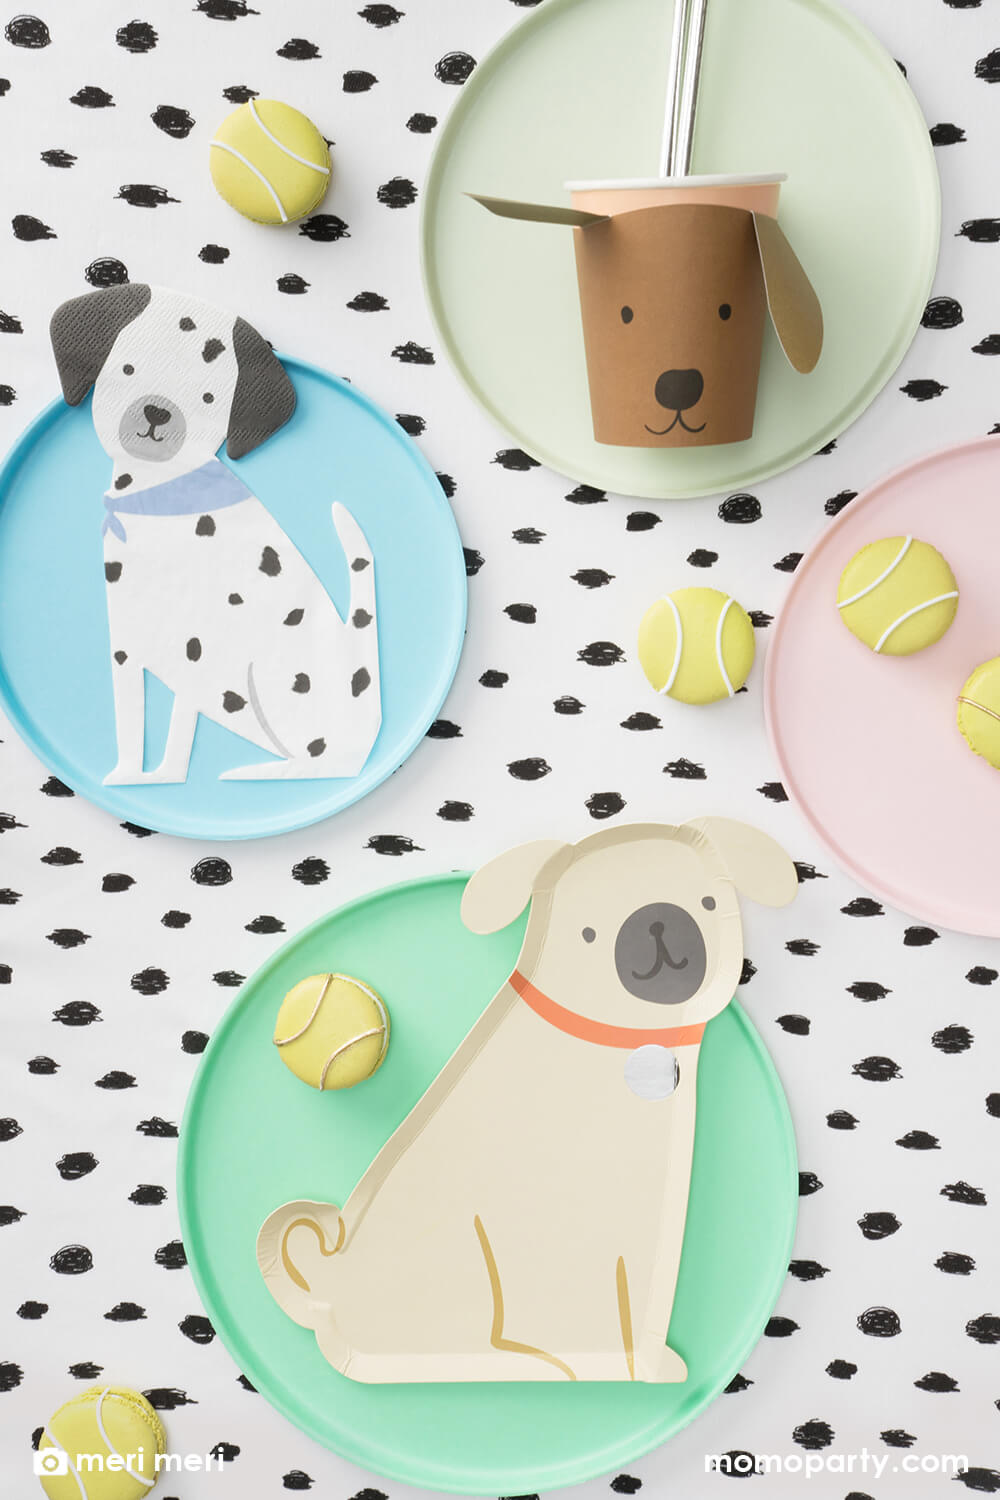 Momo Party kid's puppy dog themed birthday party table flat lay, decorated with Pug Plates on a mint round plate, Brown Puppy Cup with silver foil straws on pistachio colored plate, Puppy Napkins on the light blue round plate, tennis ball macarons all on the black dots tablecloth,  These modern and cute design party supplies from Meri Meri of Cat and Dog Collection,will make an Insta-perfect party table for your kid's puppy or dog themed birthday party.